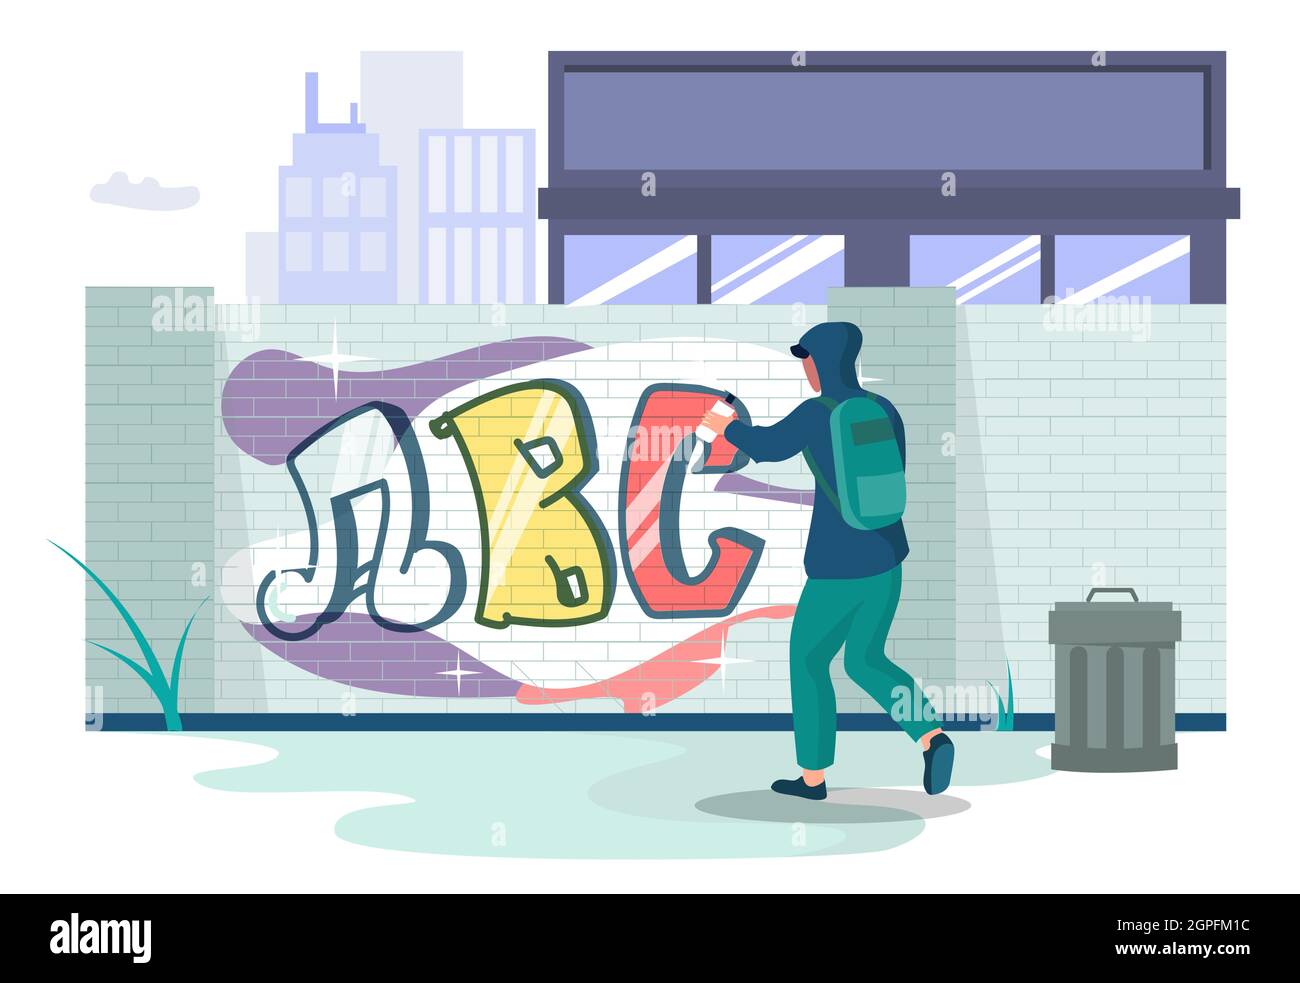 Graffiti art artist teenager wearing hoodie painting wall with paint spray, vector illustration. Street art concept. Stock Vector